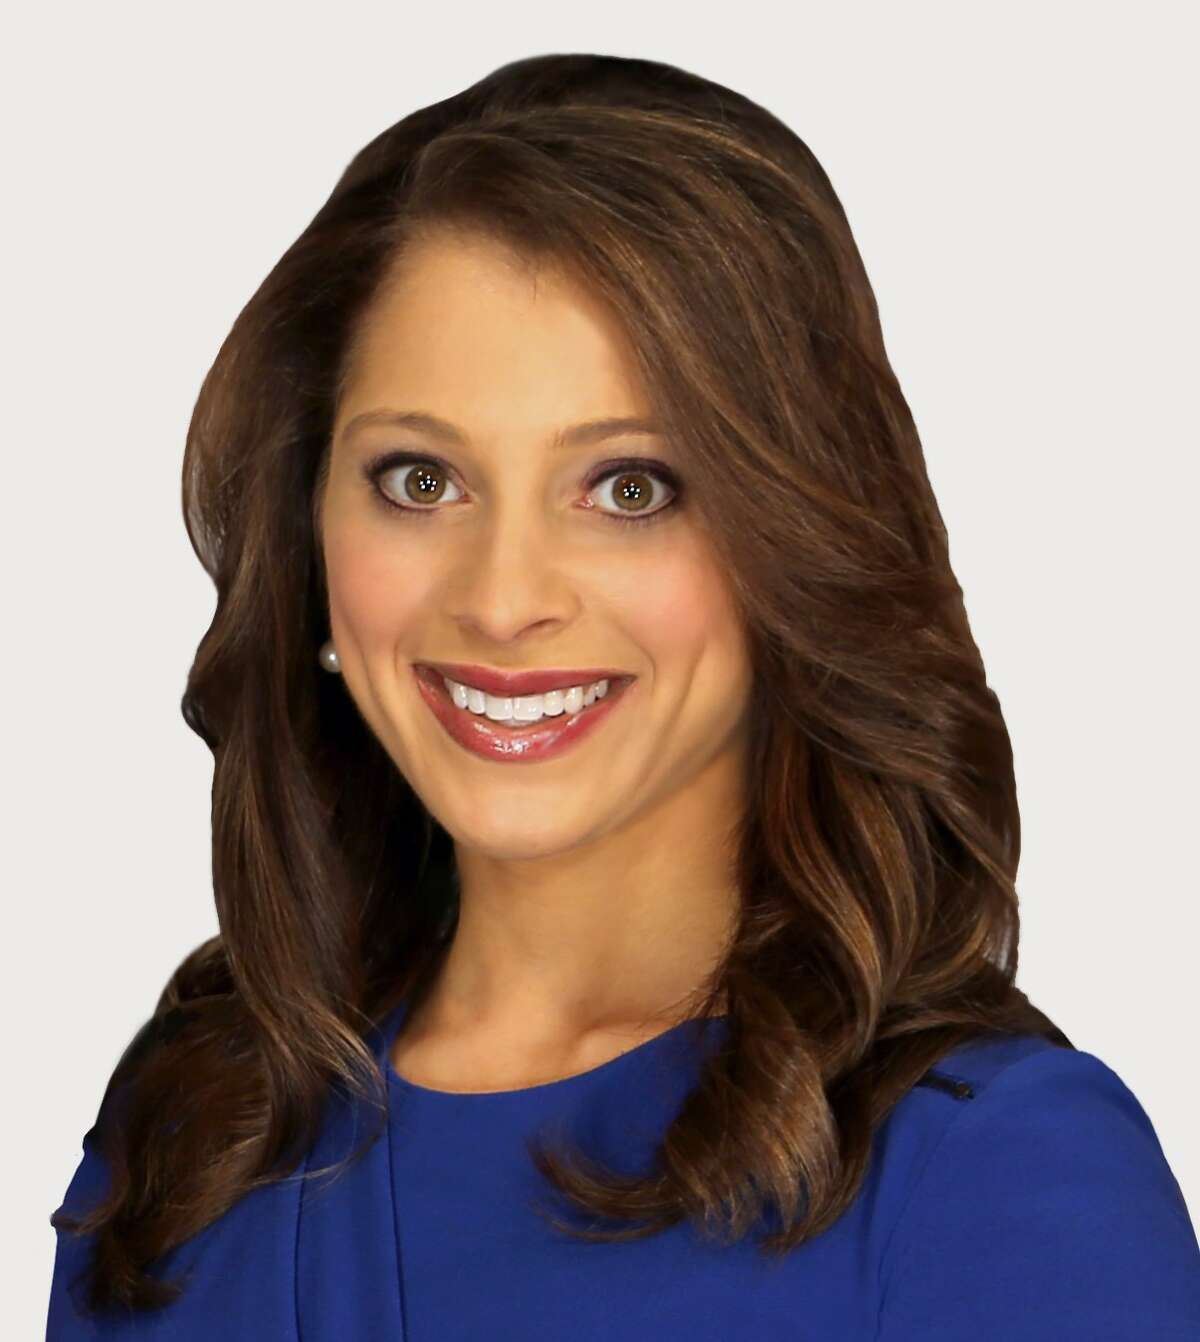 Lindsey Day joined KRIV-TV in March 2015 as the weekend and weekday meteorologist. In late February 2016, a Fox Television representative said Day was leaving the station and that her last day was March 6. These days, she's been working as a health-fitness specialist and occasionally doing related segments for KIAH-TV.